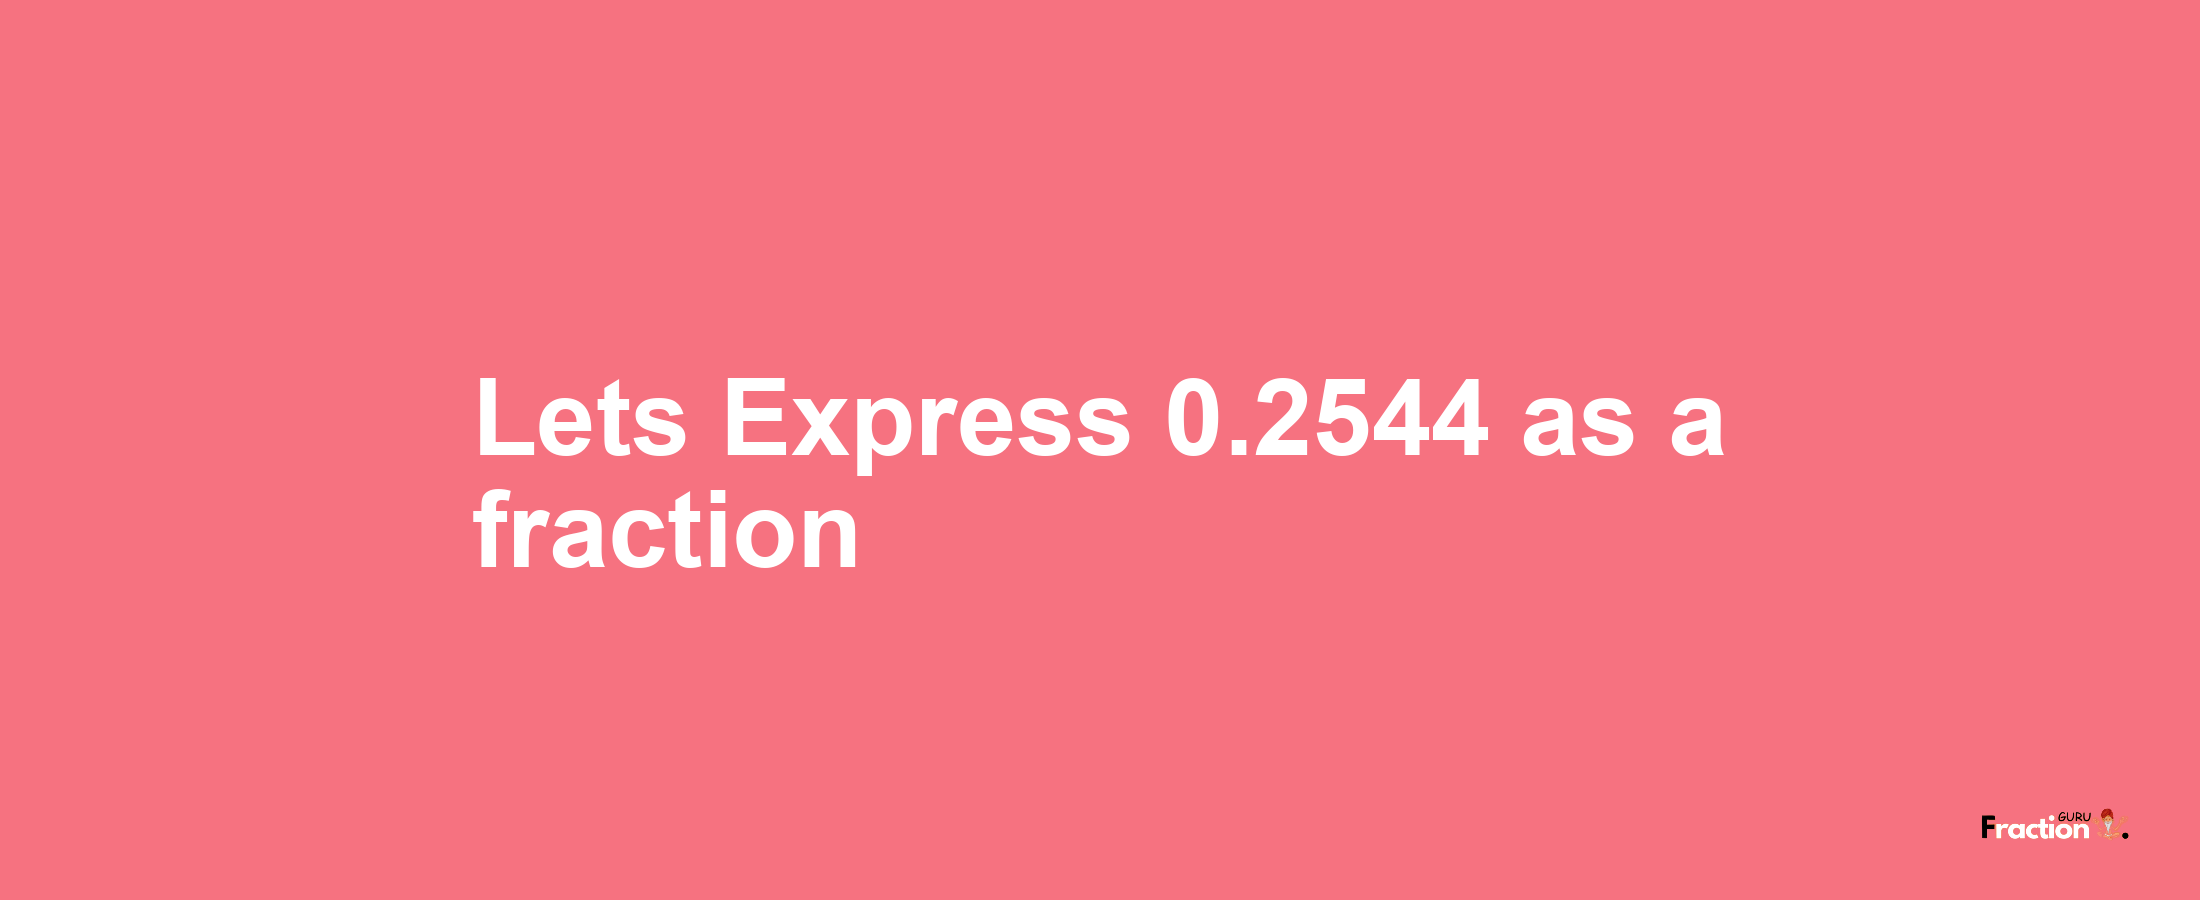 Lets Express 0.2544 as afraction